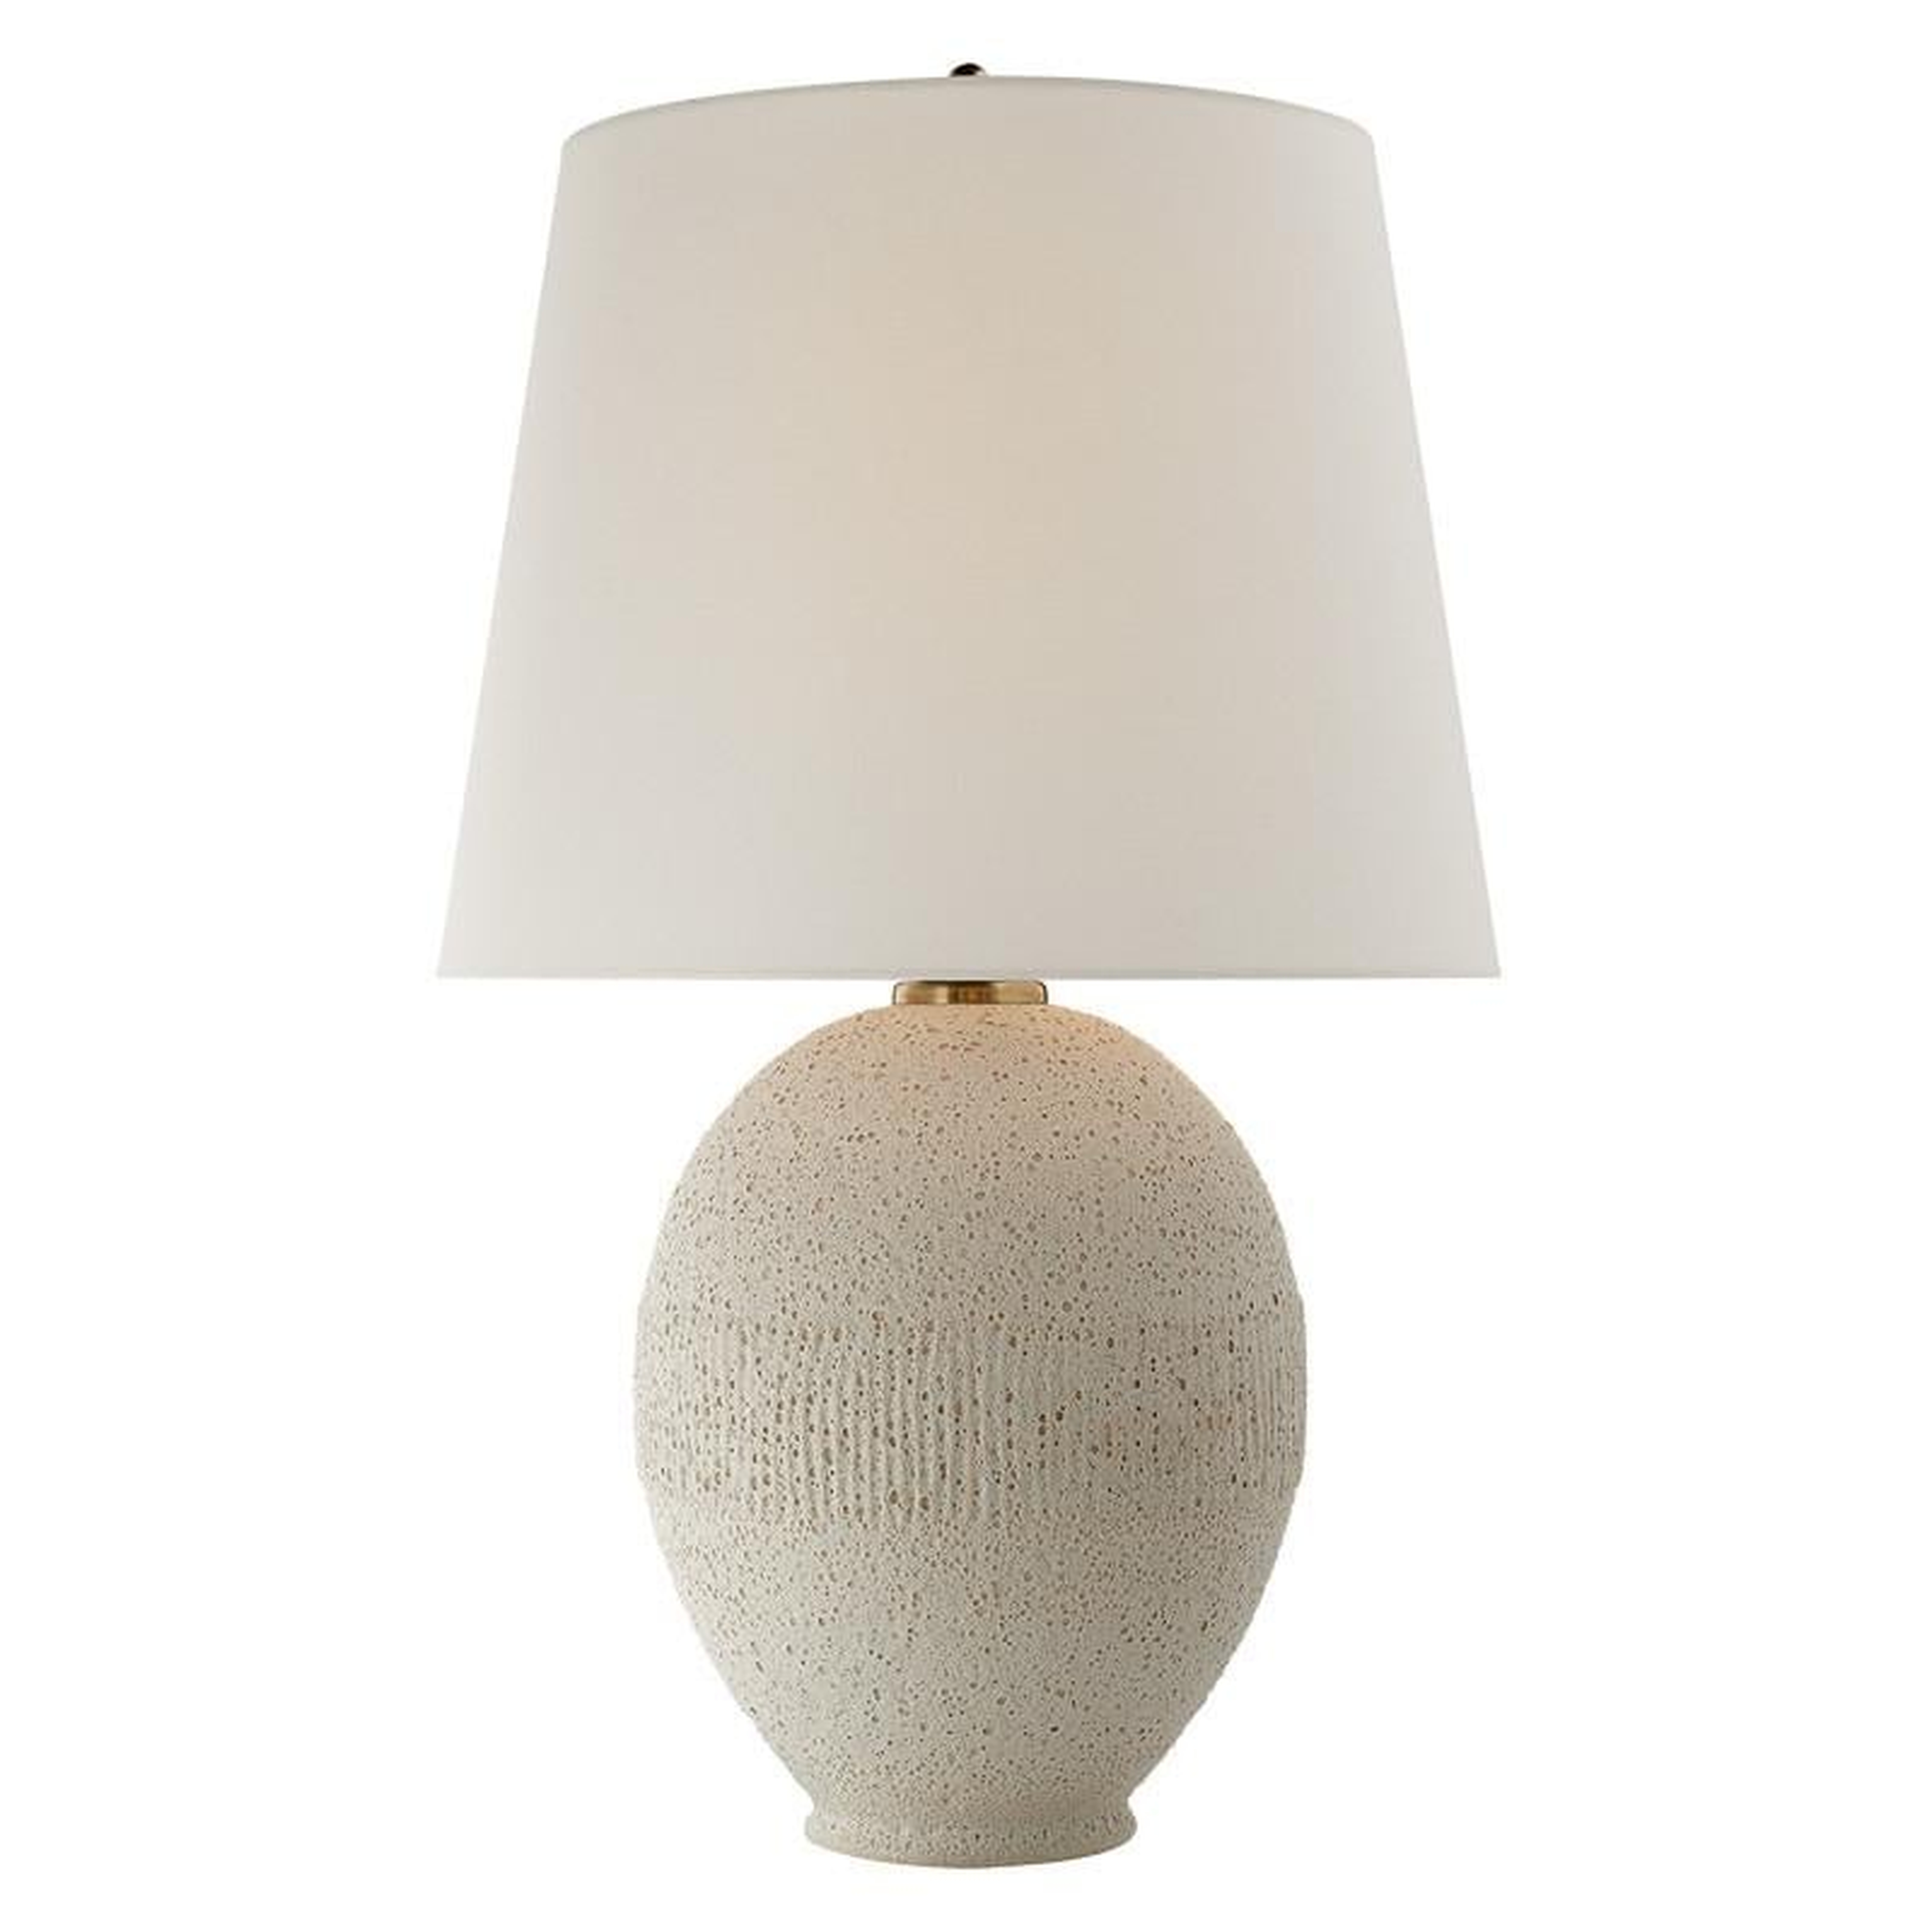 TOULON TABLE LAMP - VOLCANIC IVORY - McGee & Co.